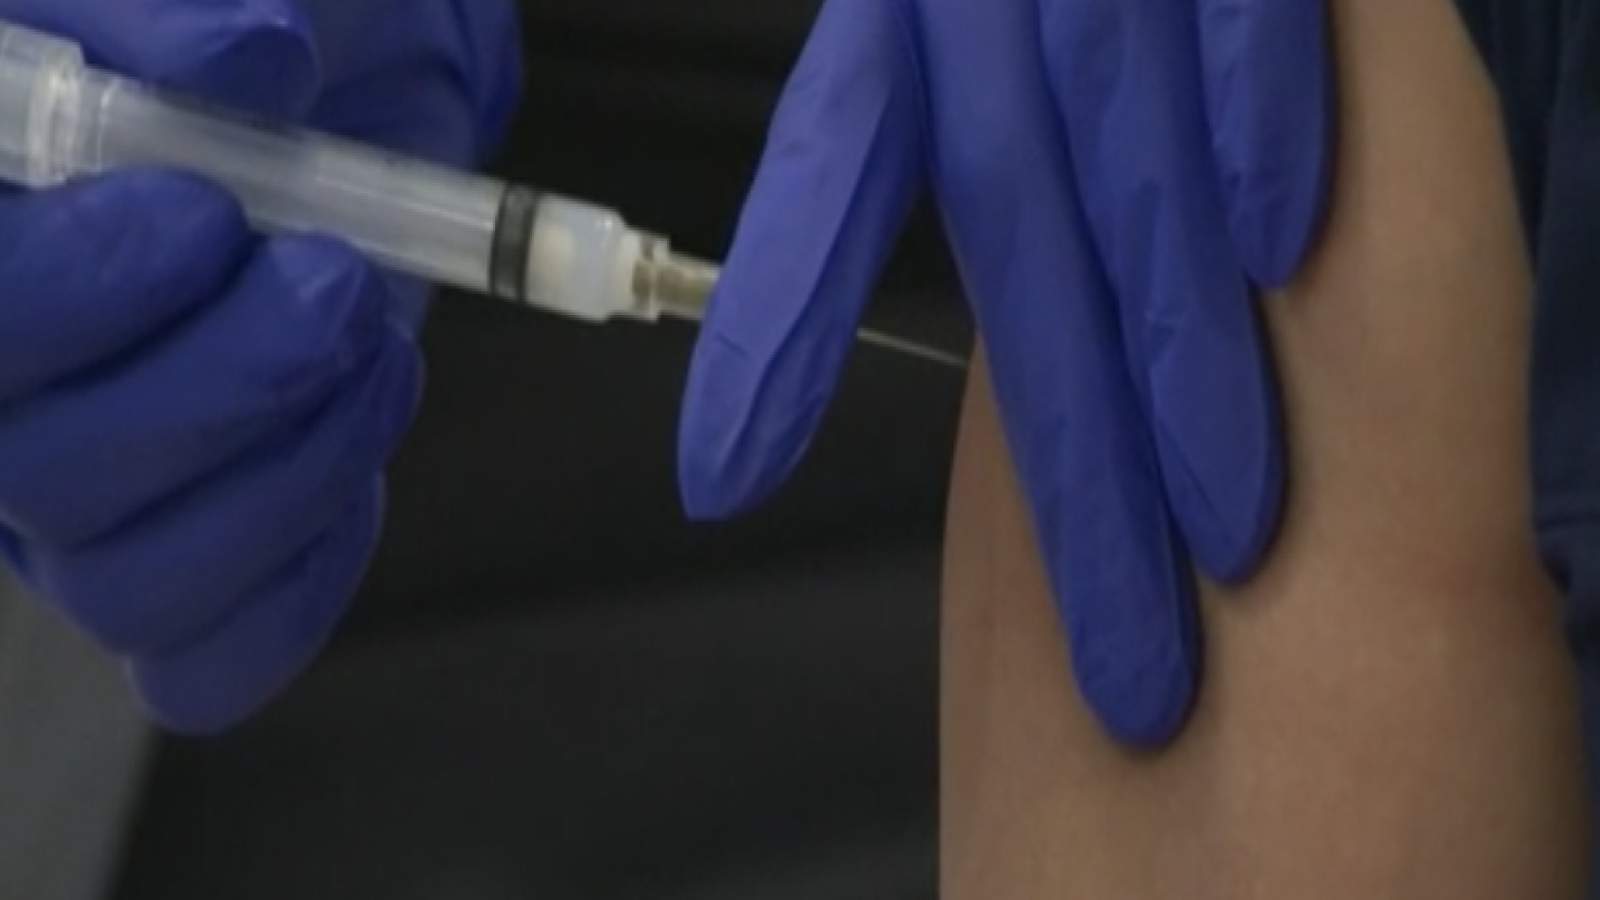 Lake County Announces First Vaccinations for People Over 65